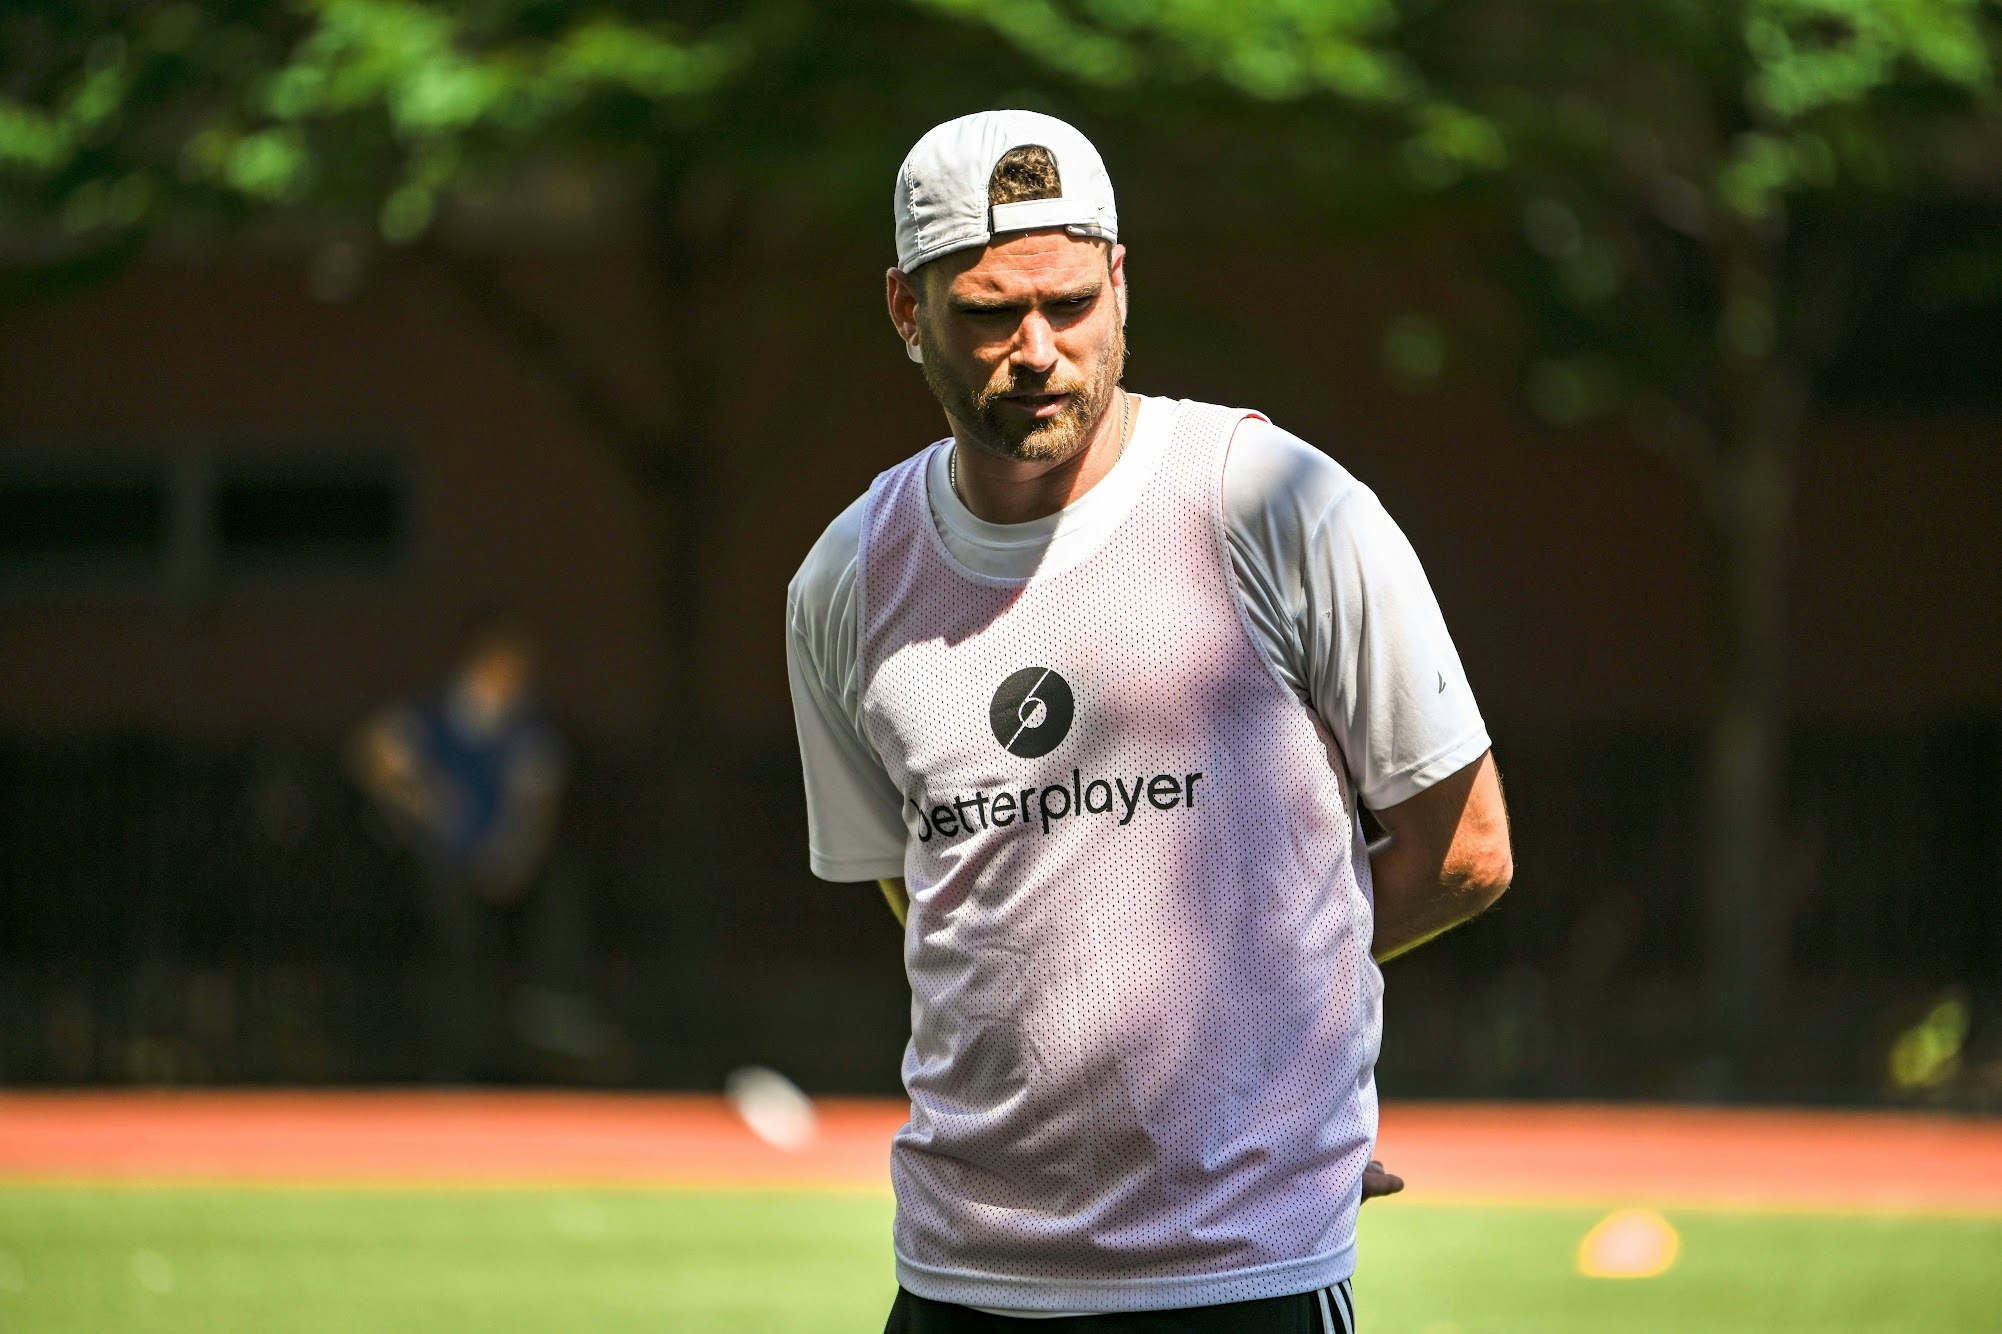 When injuries open up new doors, discovering Coach Chris's soccer journey